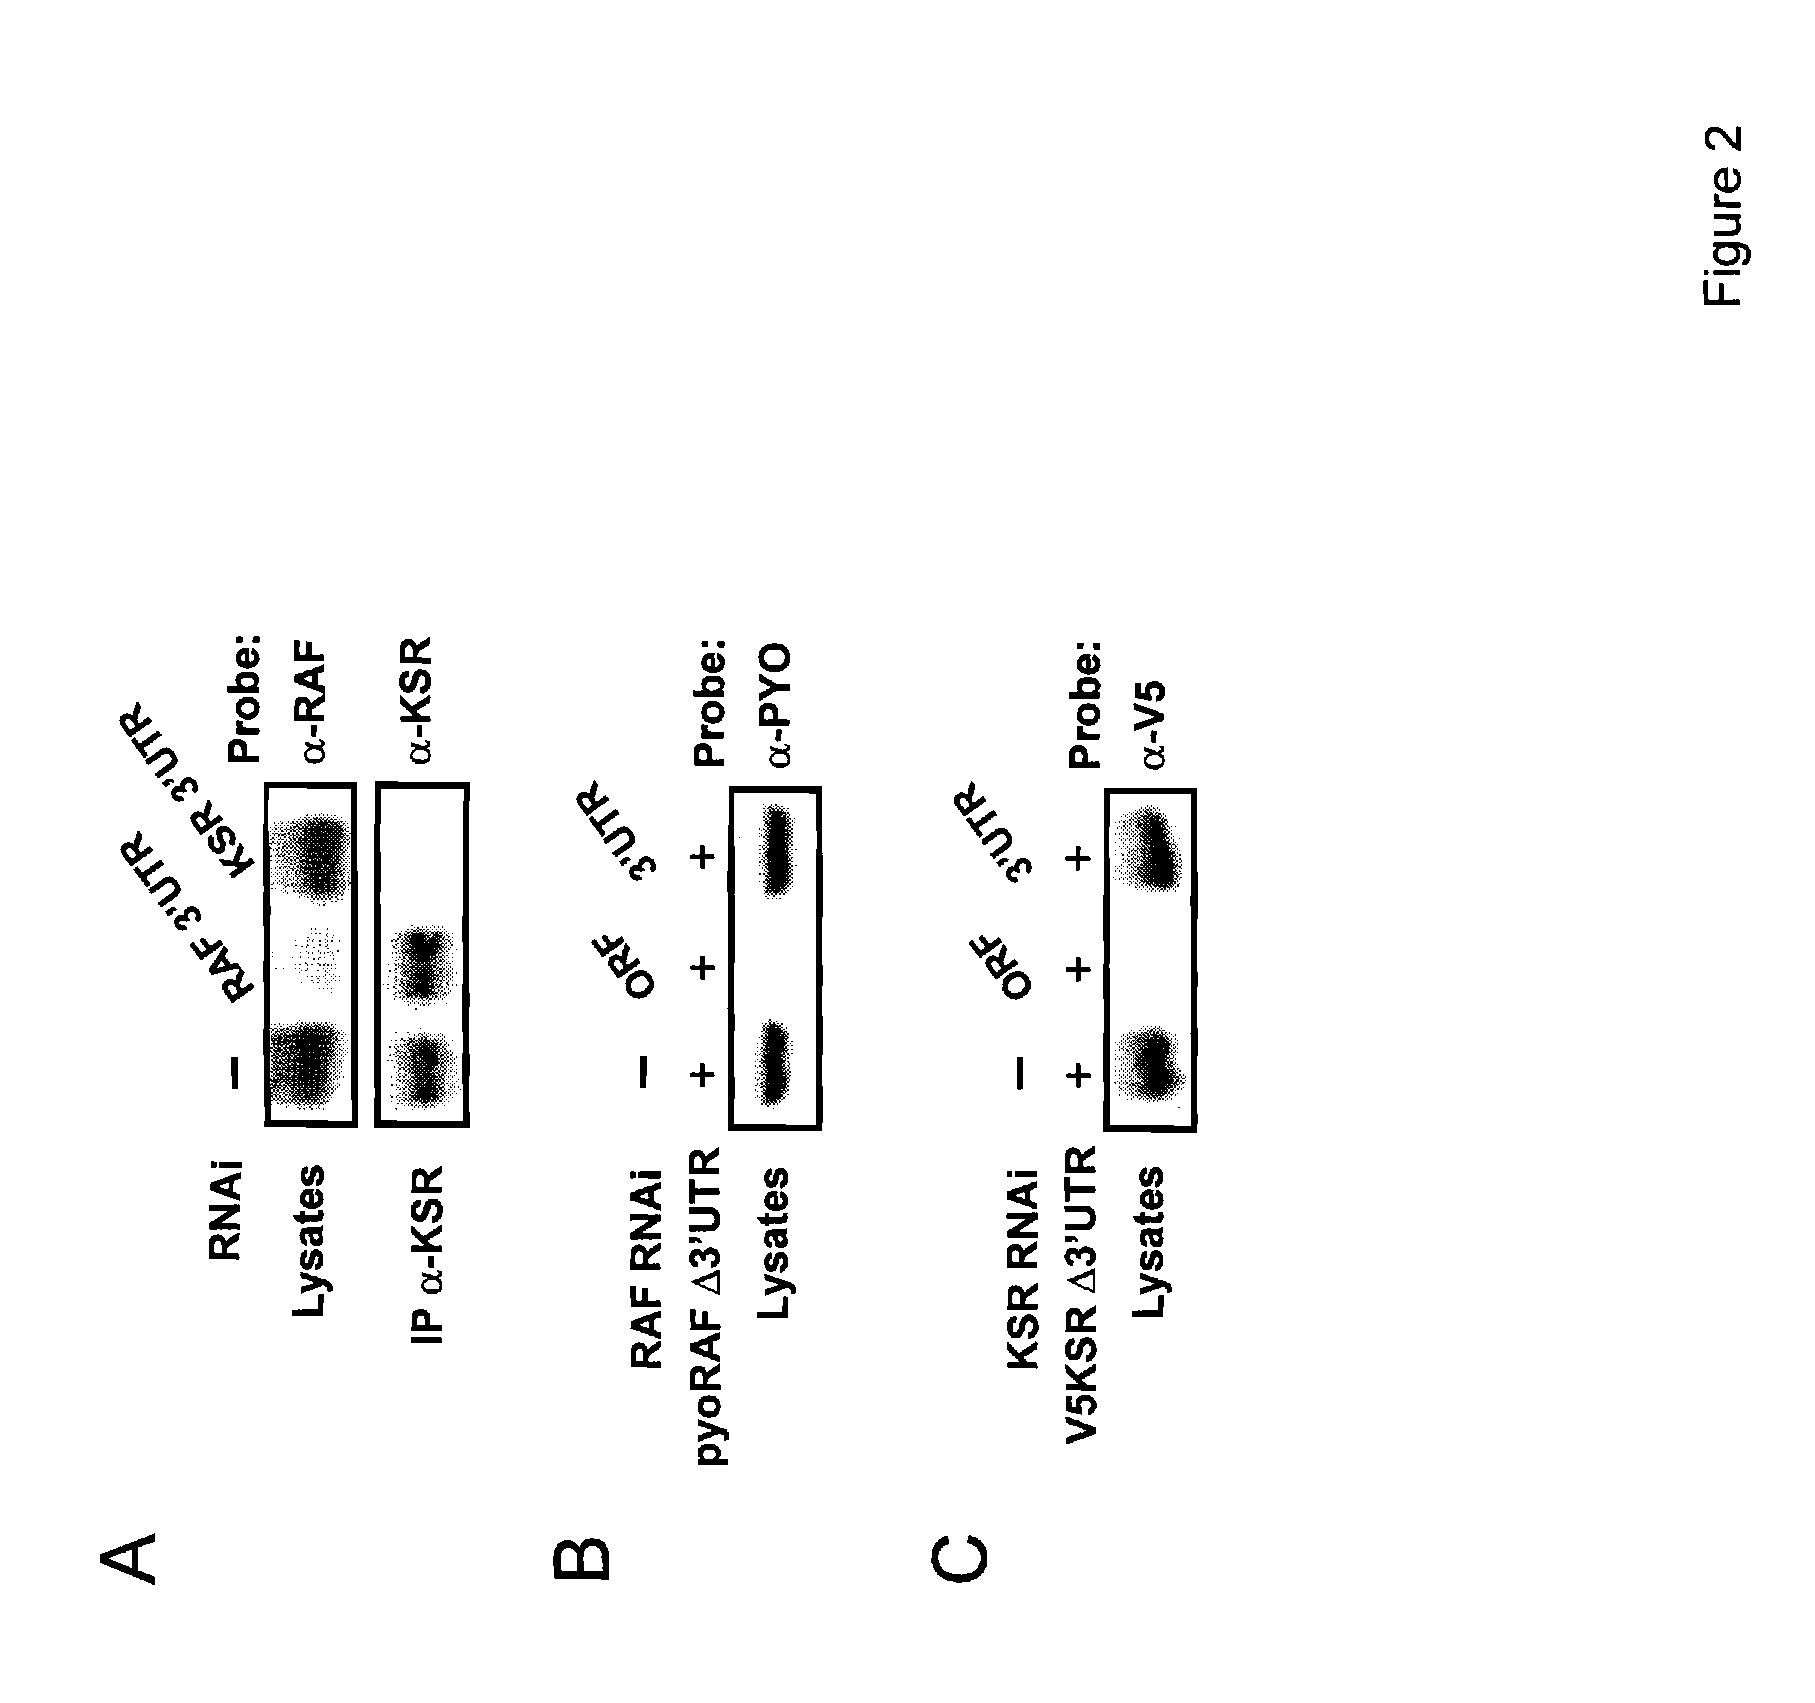 Novel protein member of the ras/mapk pathway, antibodies thereof and methods and kits of using same